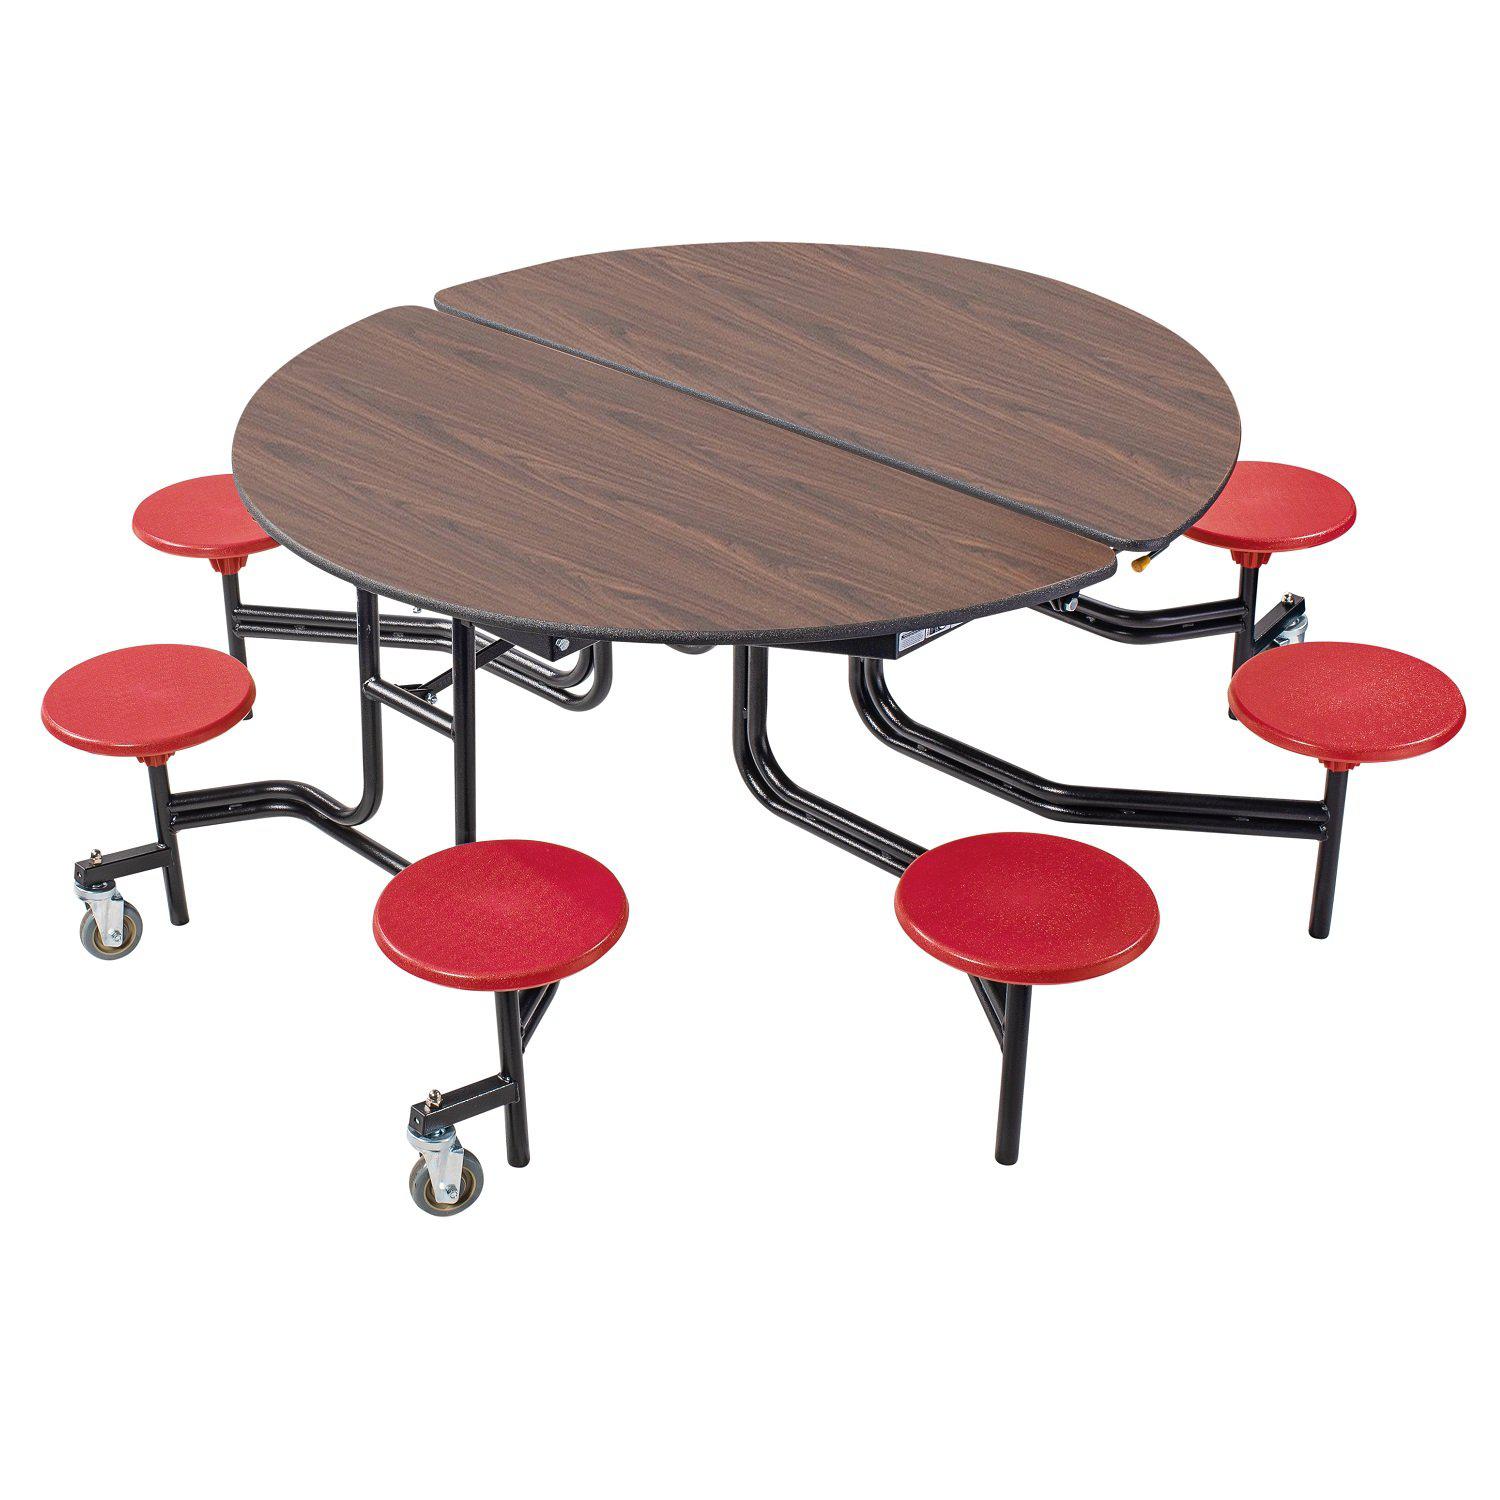 Mobile Cafeteria Table with 8 Stools, 60" Round, Plywood Core, Vinyl T-Mold Edge, Textured Black Frame